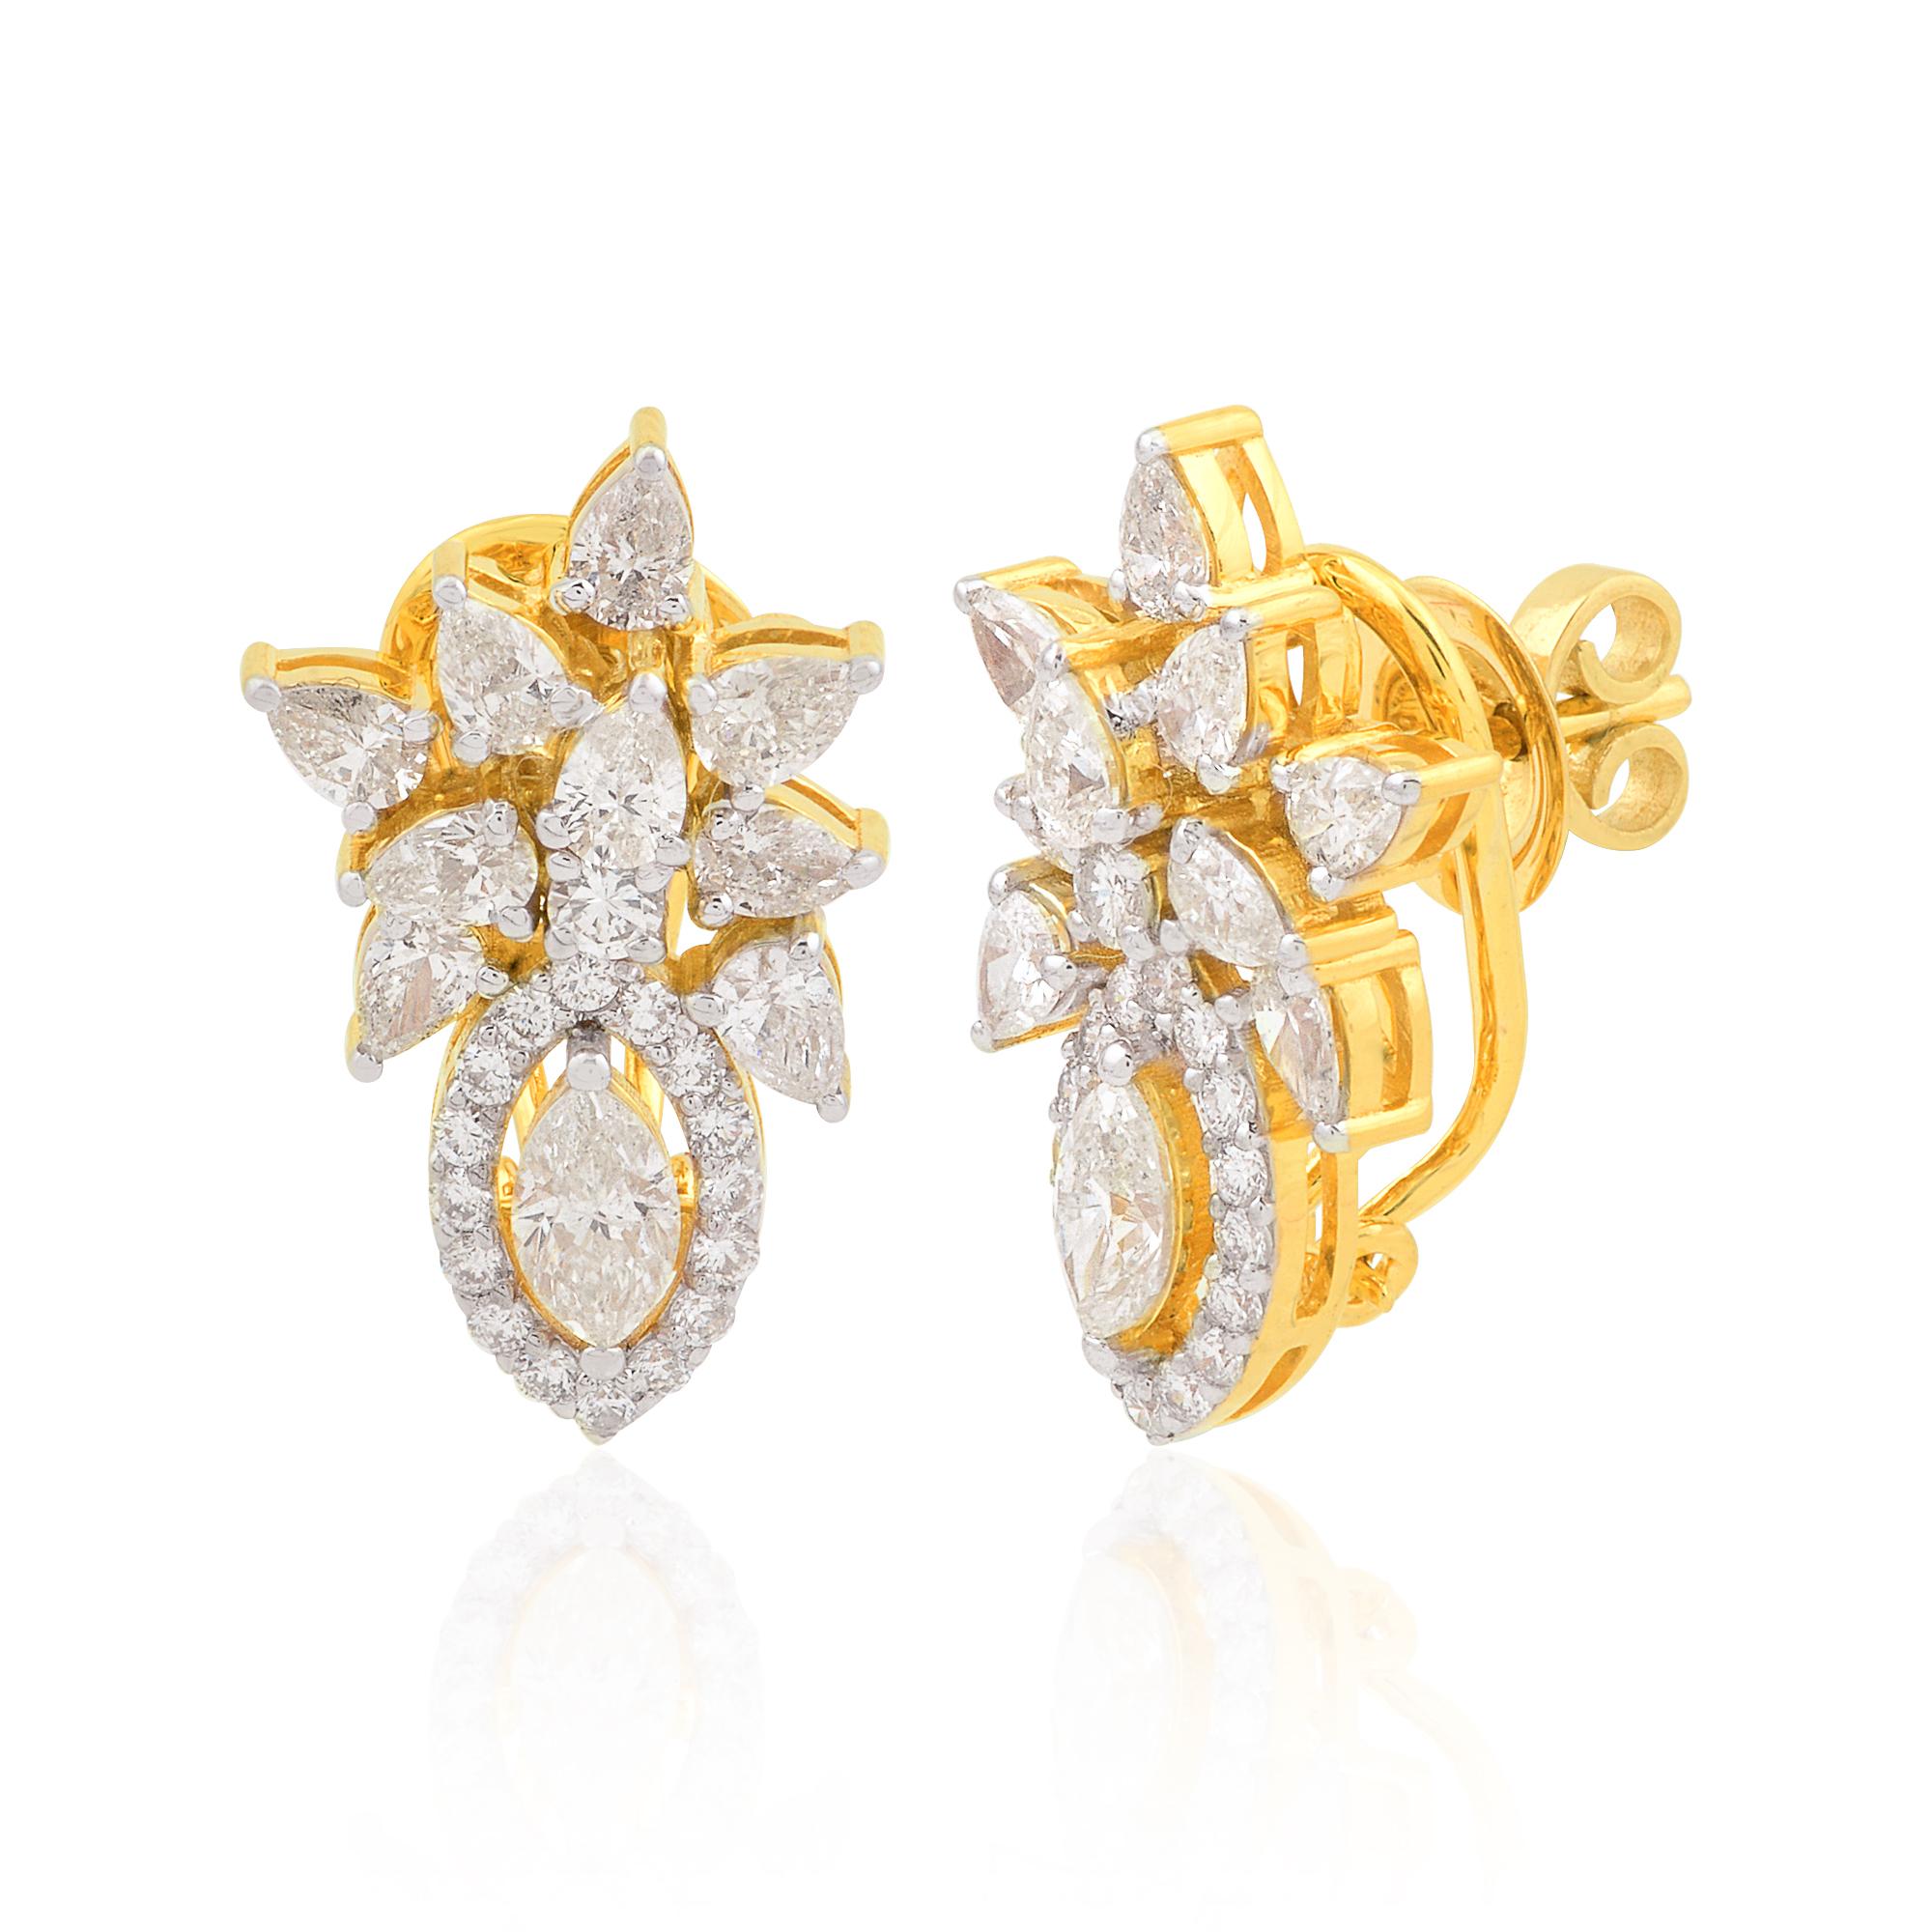 Item Code :- SEE-1869
Gross Wet. :- 7.84 gm
18k Yellow Gold Wet. :- 7.30 gm
Diamond Wet. :- 2.70 Ct. ( AVERAGE DIAMOND CLARITY SI1-SI2 & COLOR H-I )
Earrings Size :- 21 mm approx.
✦ Sizing
.....................
We can adjust most items to fit your